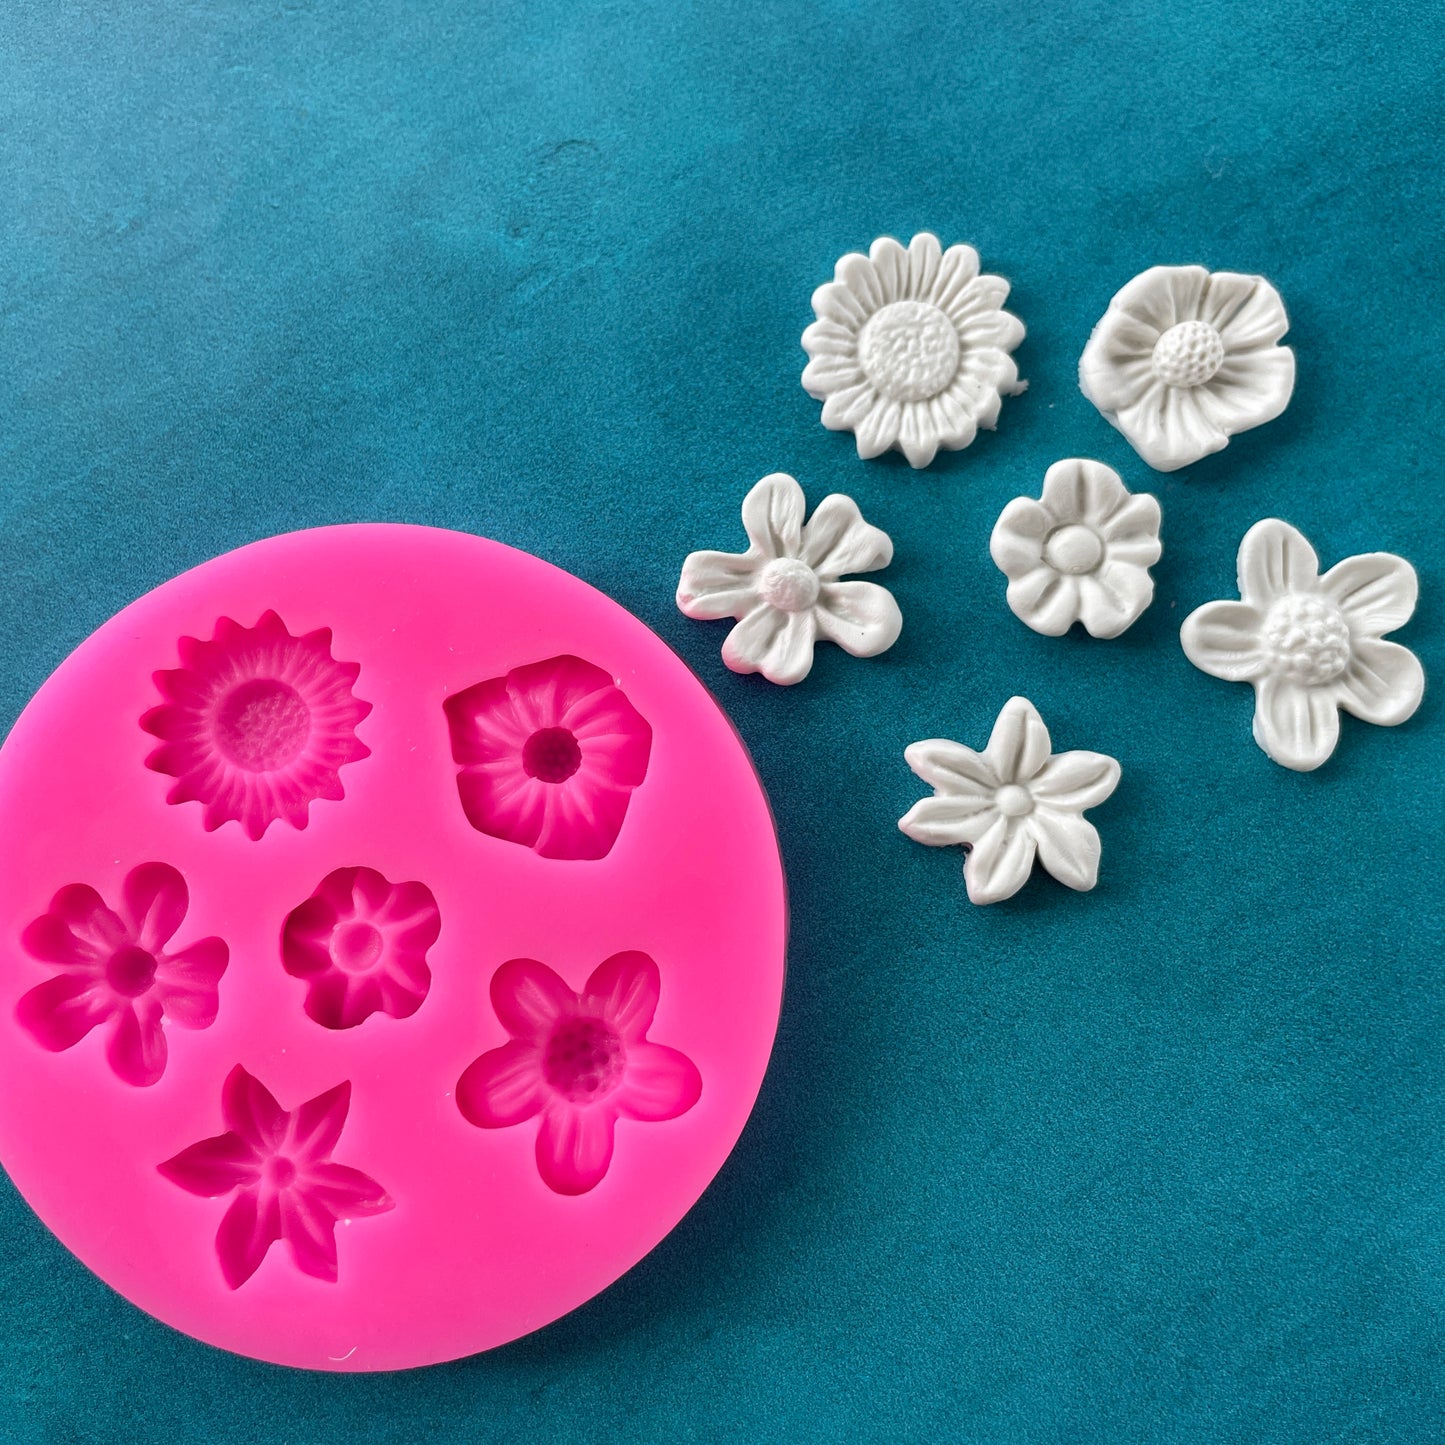 Polymer Clay Resin Mold - 6 flower variety